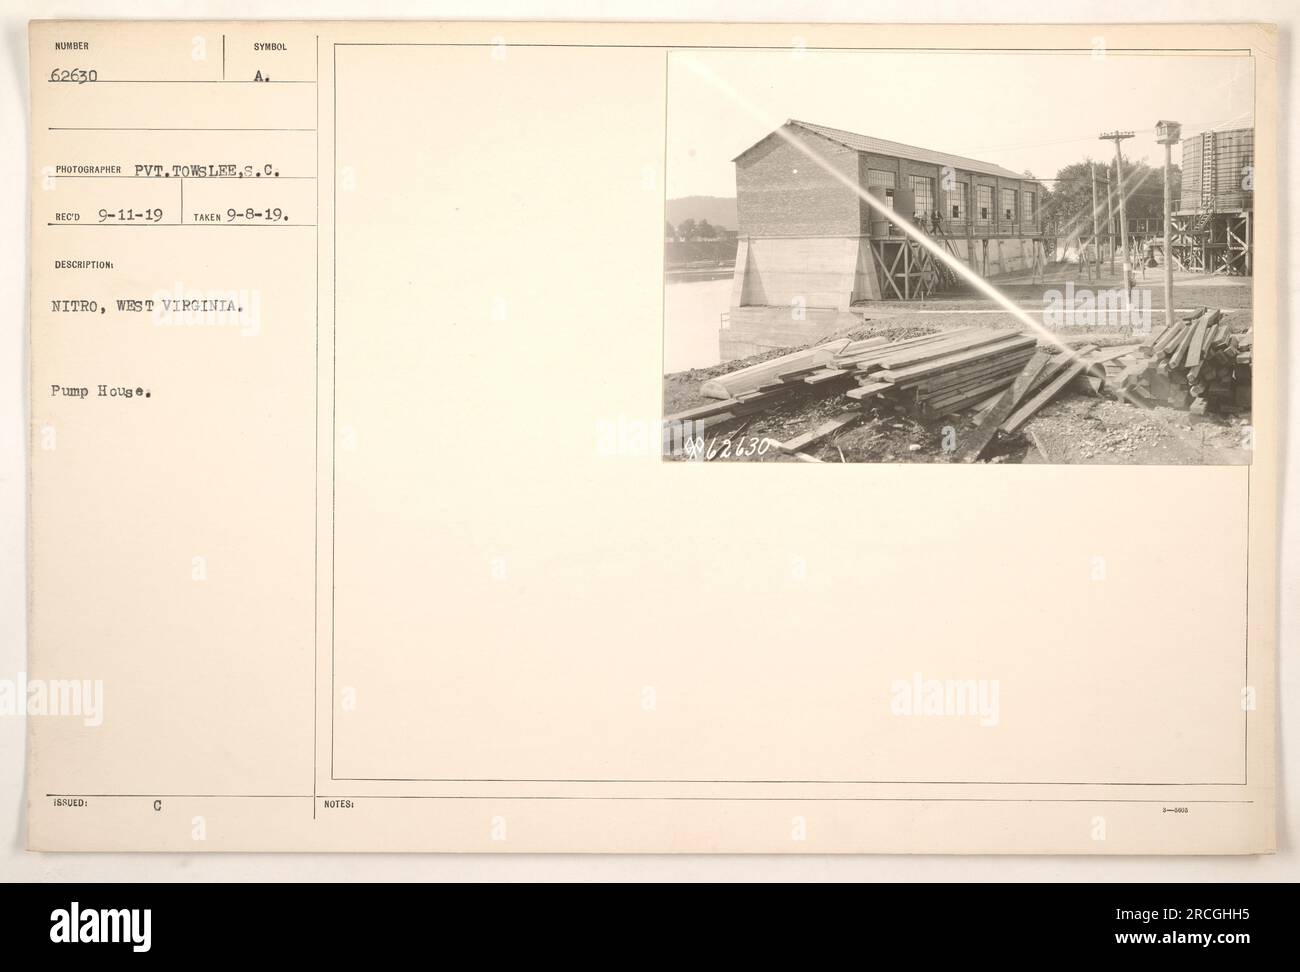 The photograph depicts a pump house located in Nitro, West Virginia. It was captured by Private Towslee, S.C. on September 8, 1919, and recorded on September 11, 1919. The pump house is marked with a symbol A. The image has been cataloged under the reference number 062630. Stock Photo